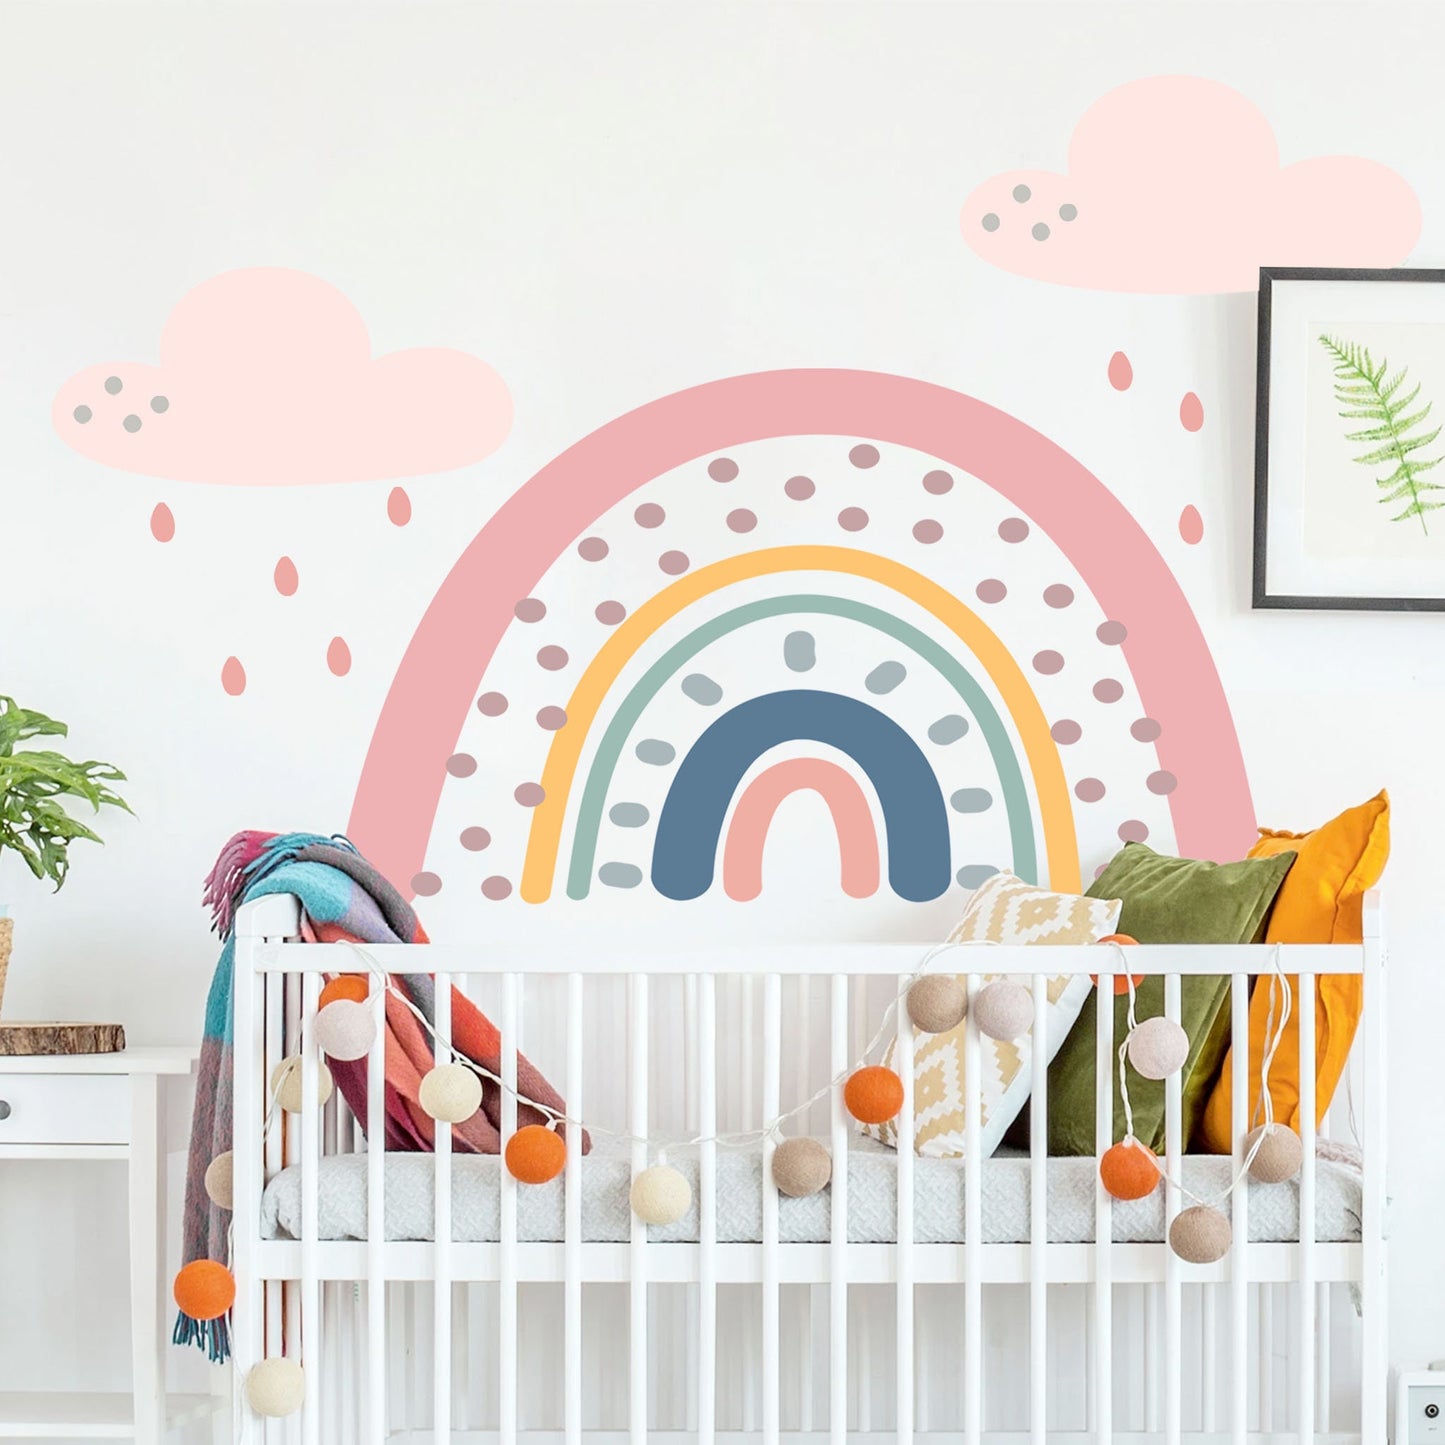 Polka Dots Rainbow under Pink Raining Clouds Wall Decal - BR042